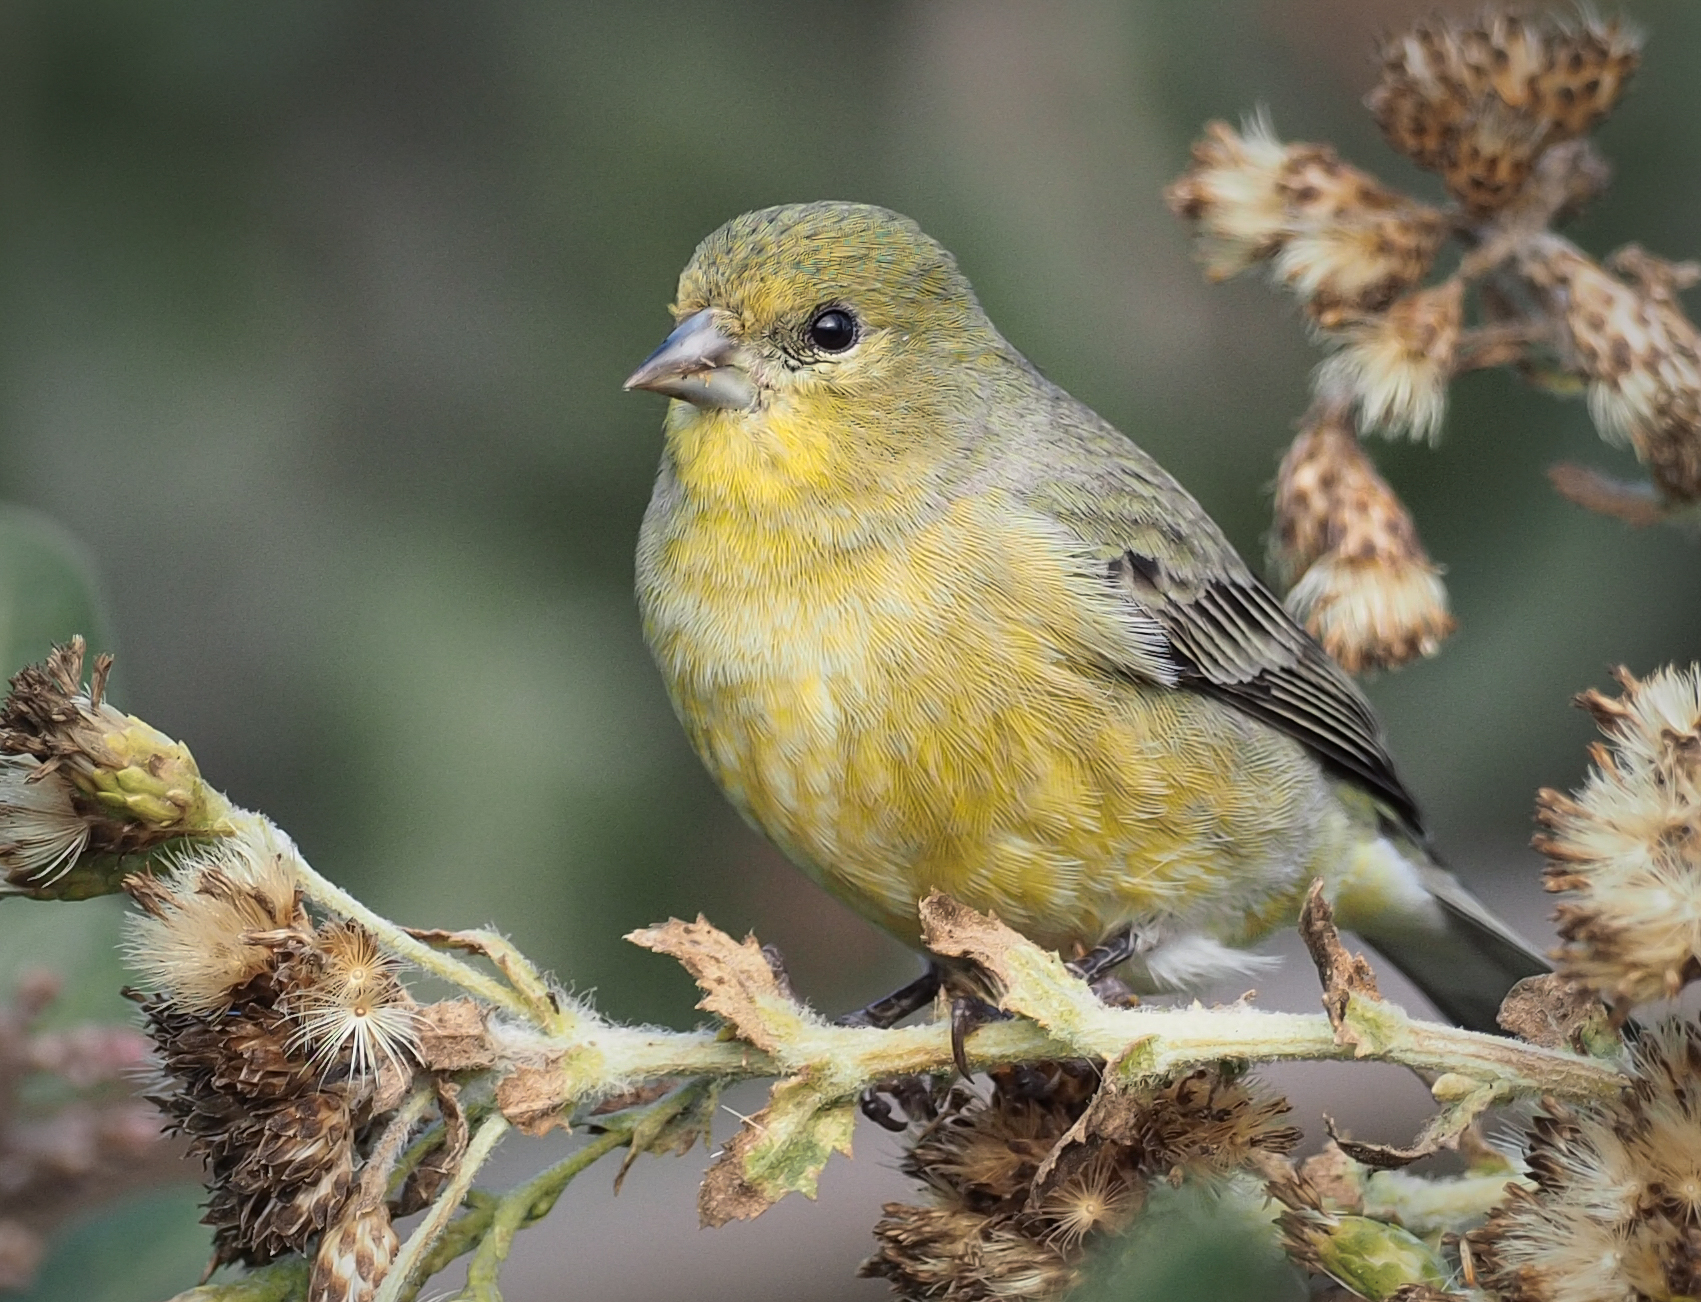 Lesser Goldfinch in Southern California